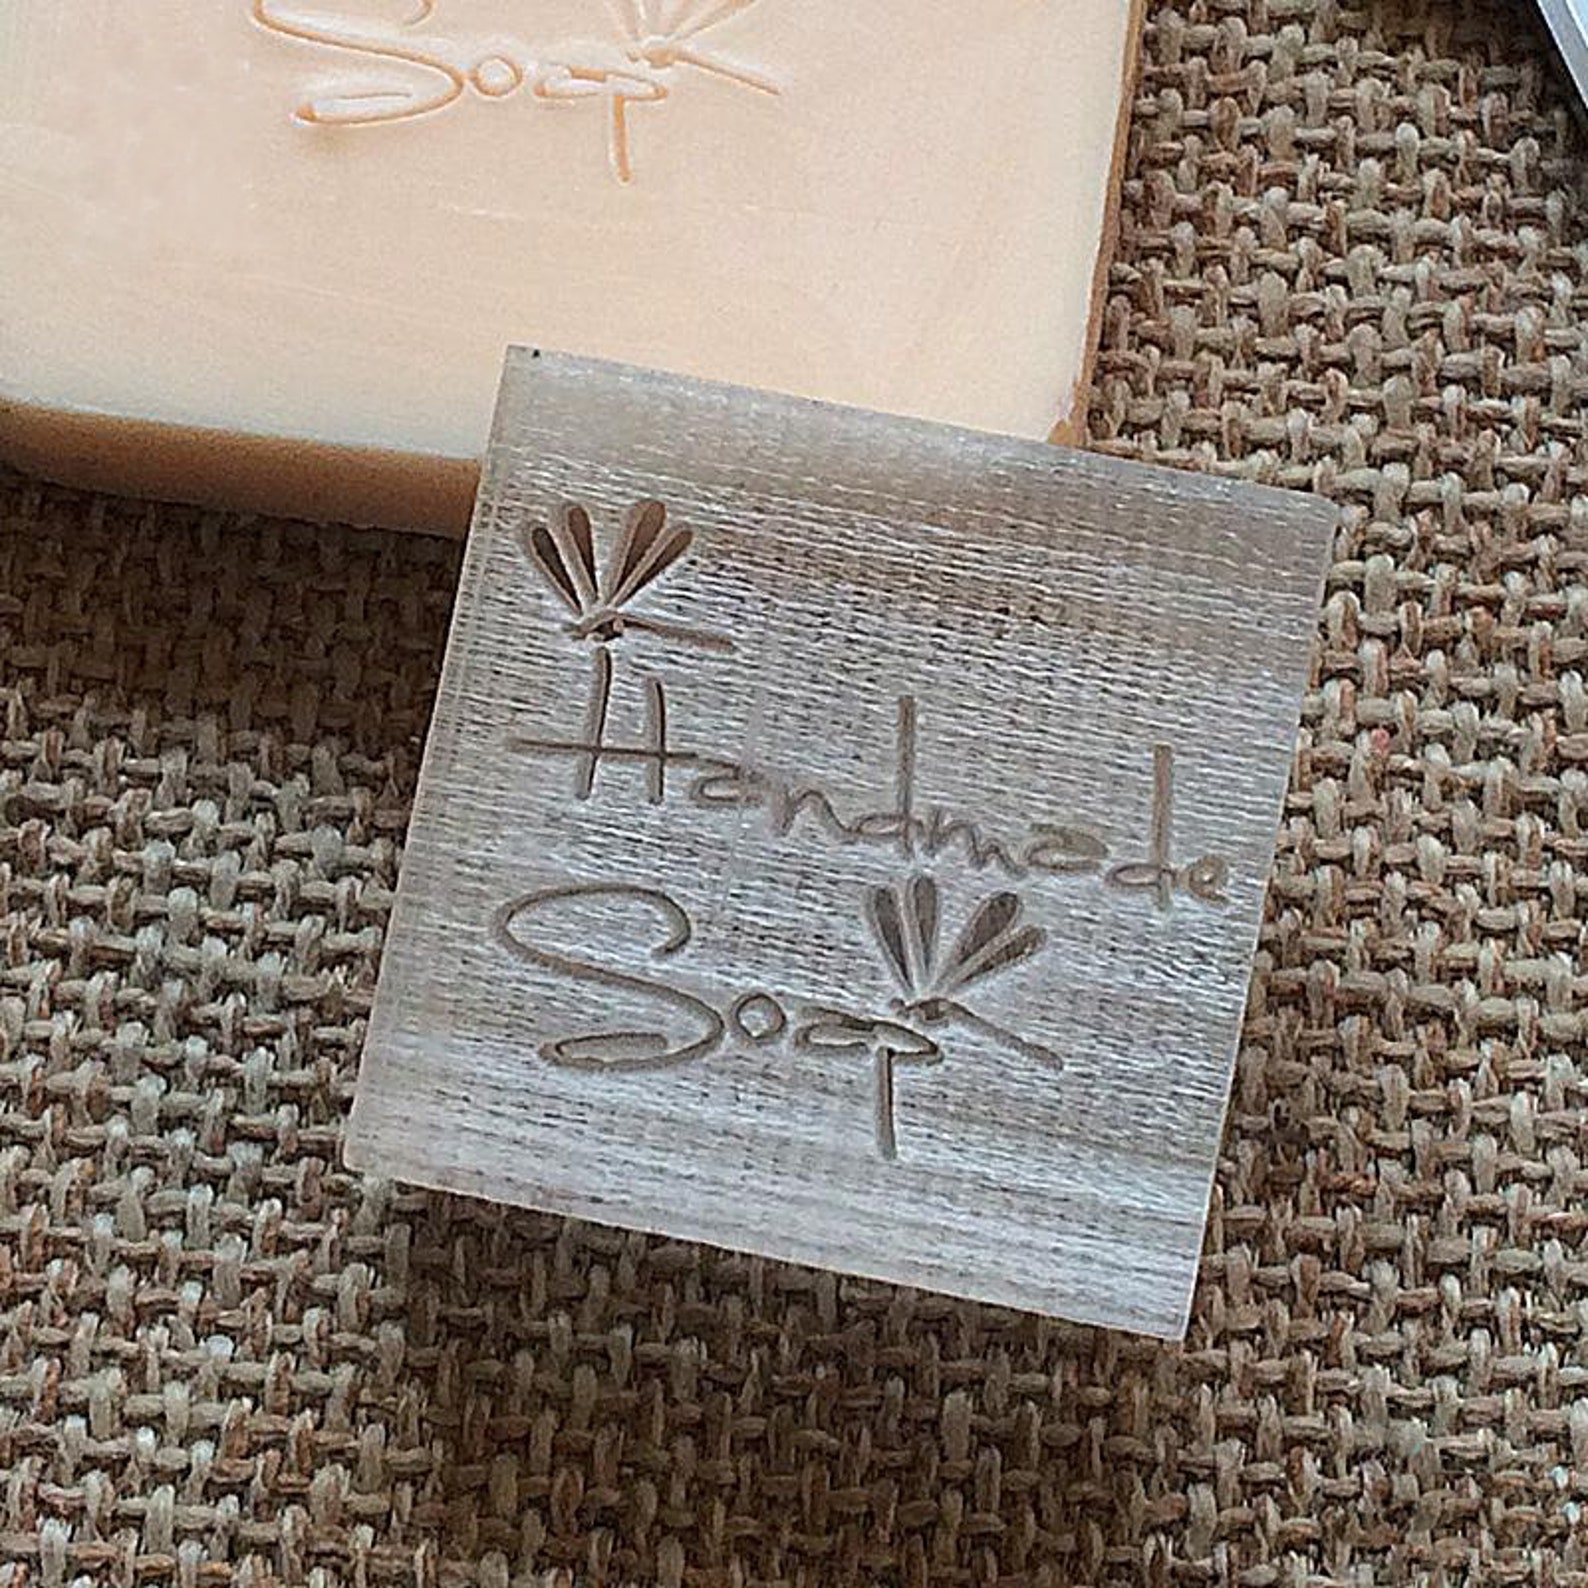 Handmade Soap Stamp Design Soap Stamp Handmade With Love Soap - Etsy